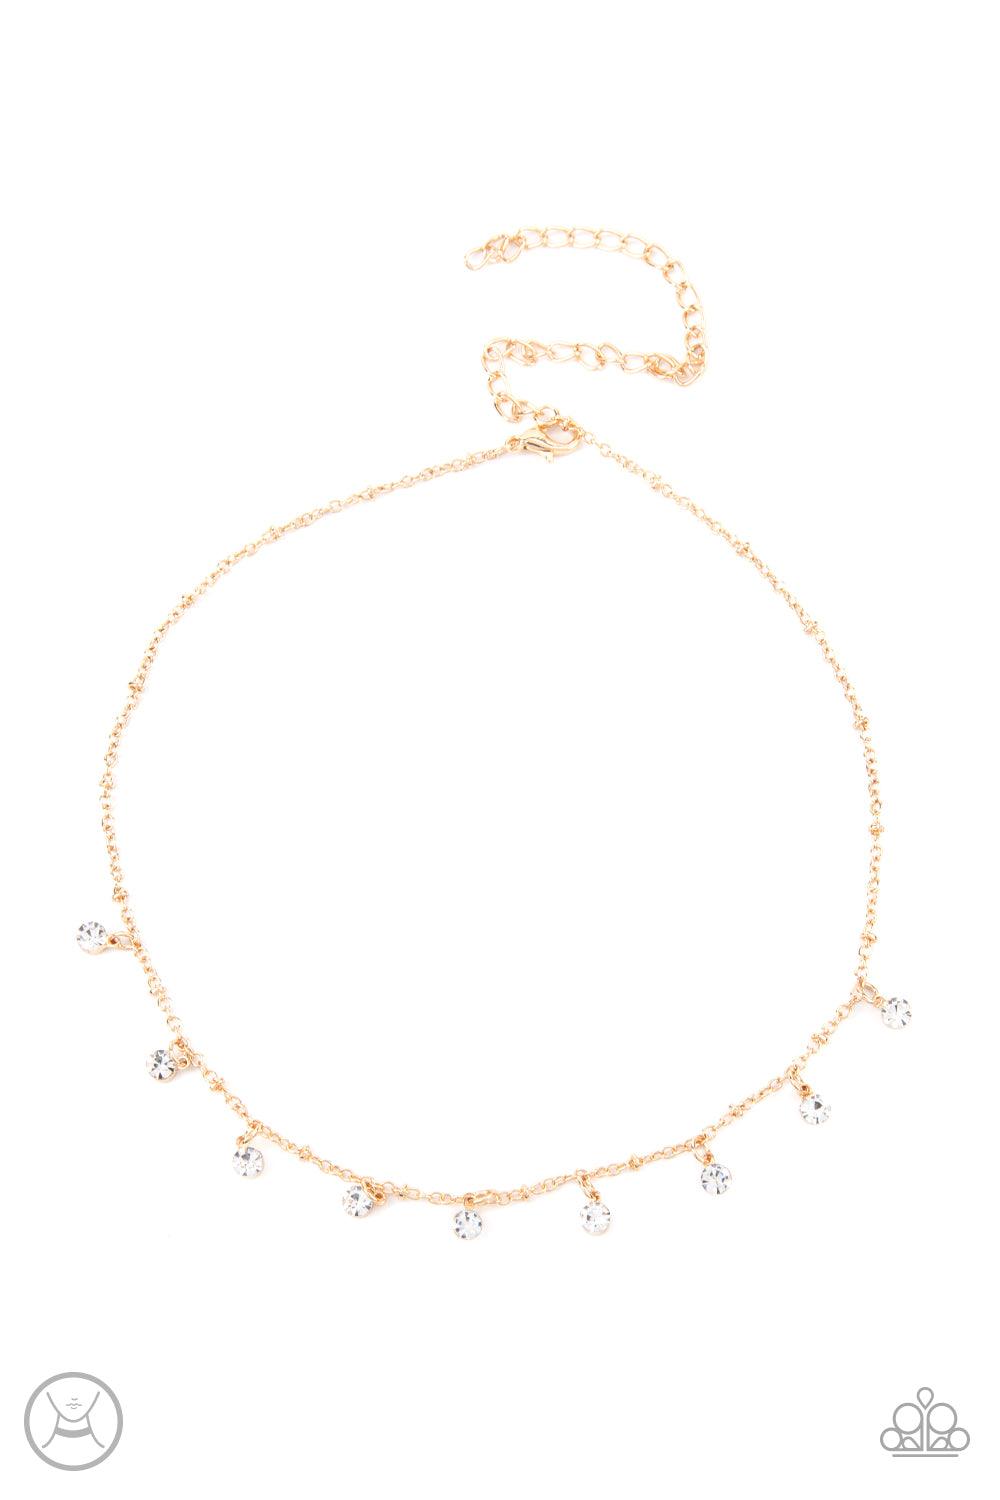 Paparazzi Accessories Dainty Diva - Gold Glassy white rhinestones swing from a dainty gold chain, creating a glamorous fringe around the neck. Features an adjustable clasp closure. Sold as one individual choker necklace. Includes one pair of matching earr